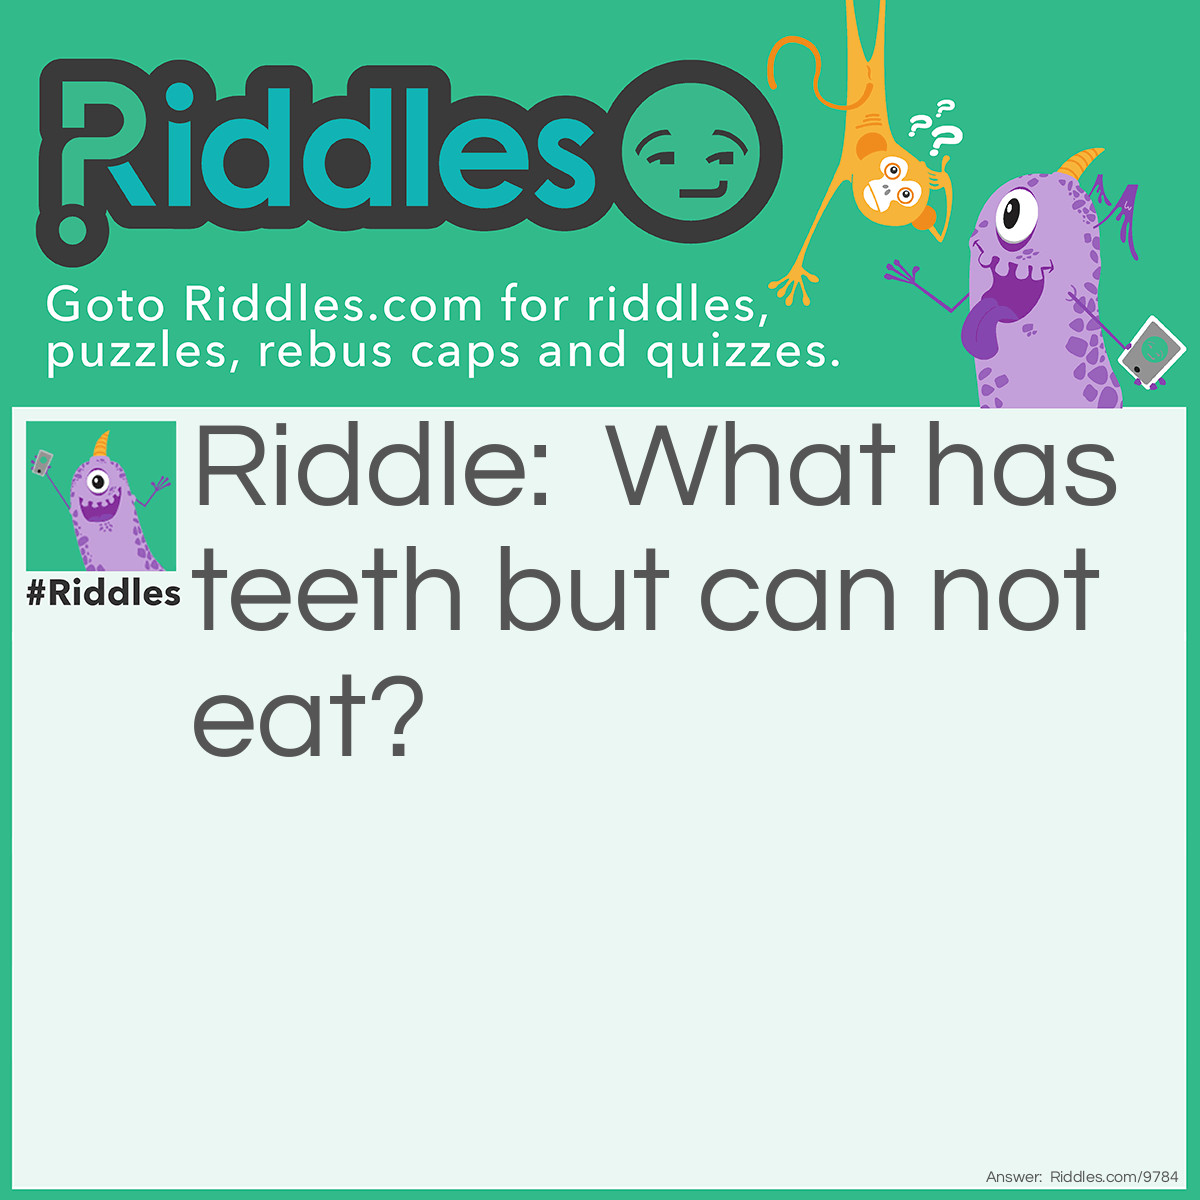 Riddle: What has teeth but can not eat? Answer: A comb. Other inanimate objects with teeth like a saw, zipper or a gear can “bite” you.